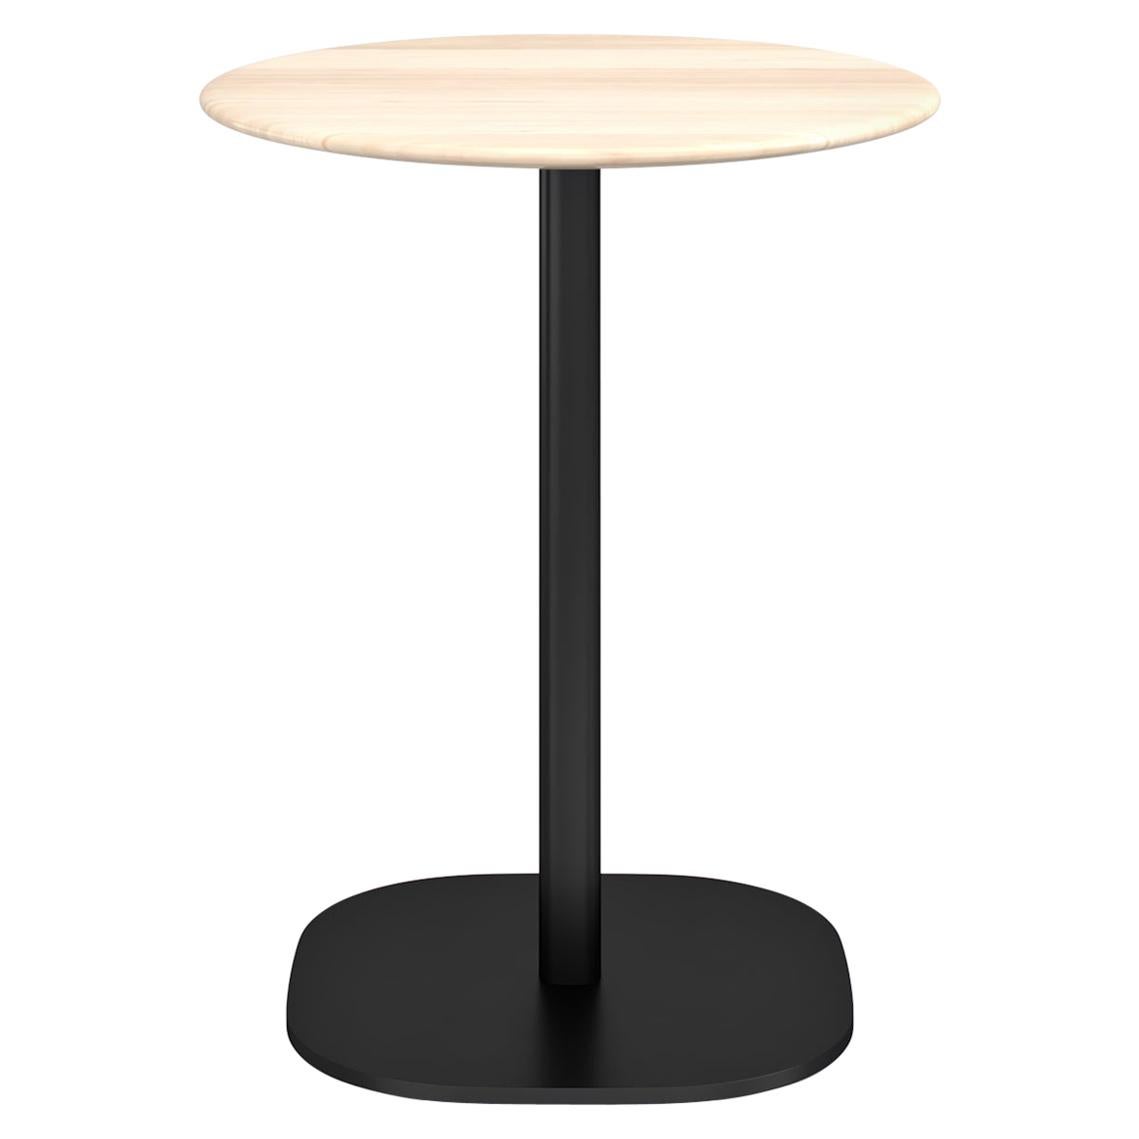 Emeco 2 Inch Round Cafe Table with Black Legs & Wood Top by Jasper Morrison